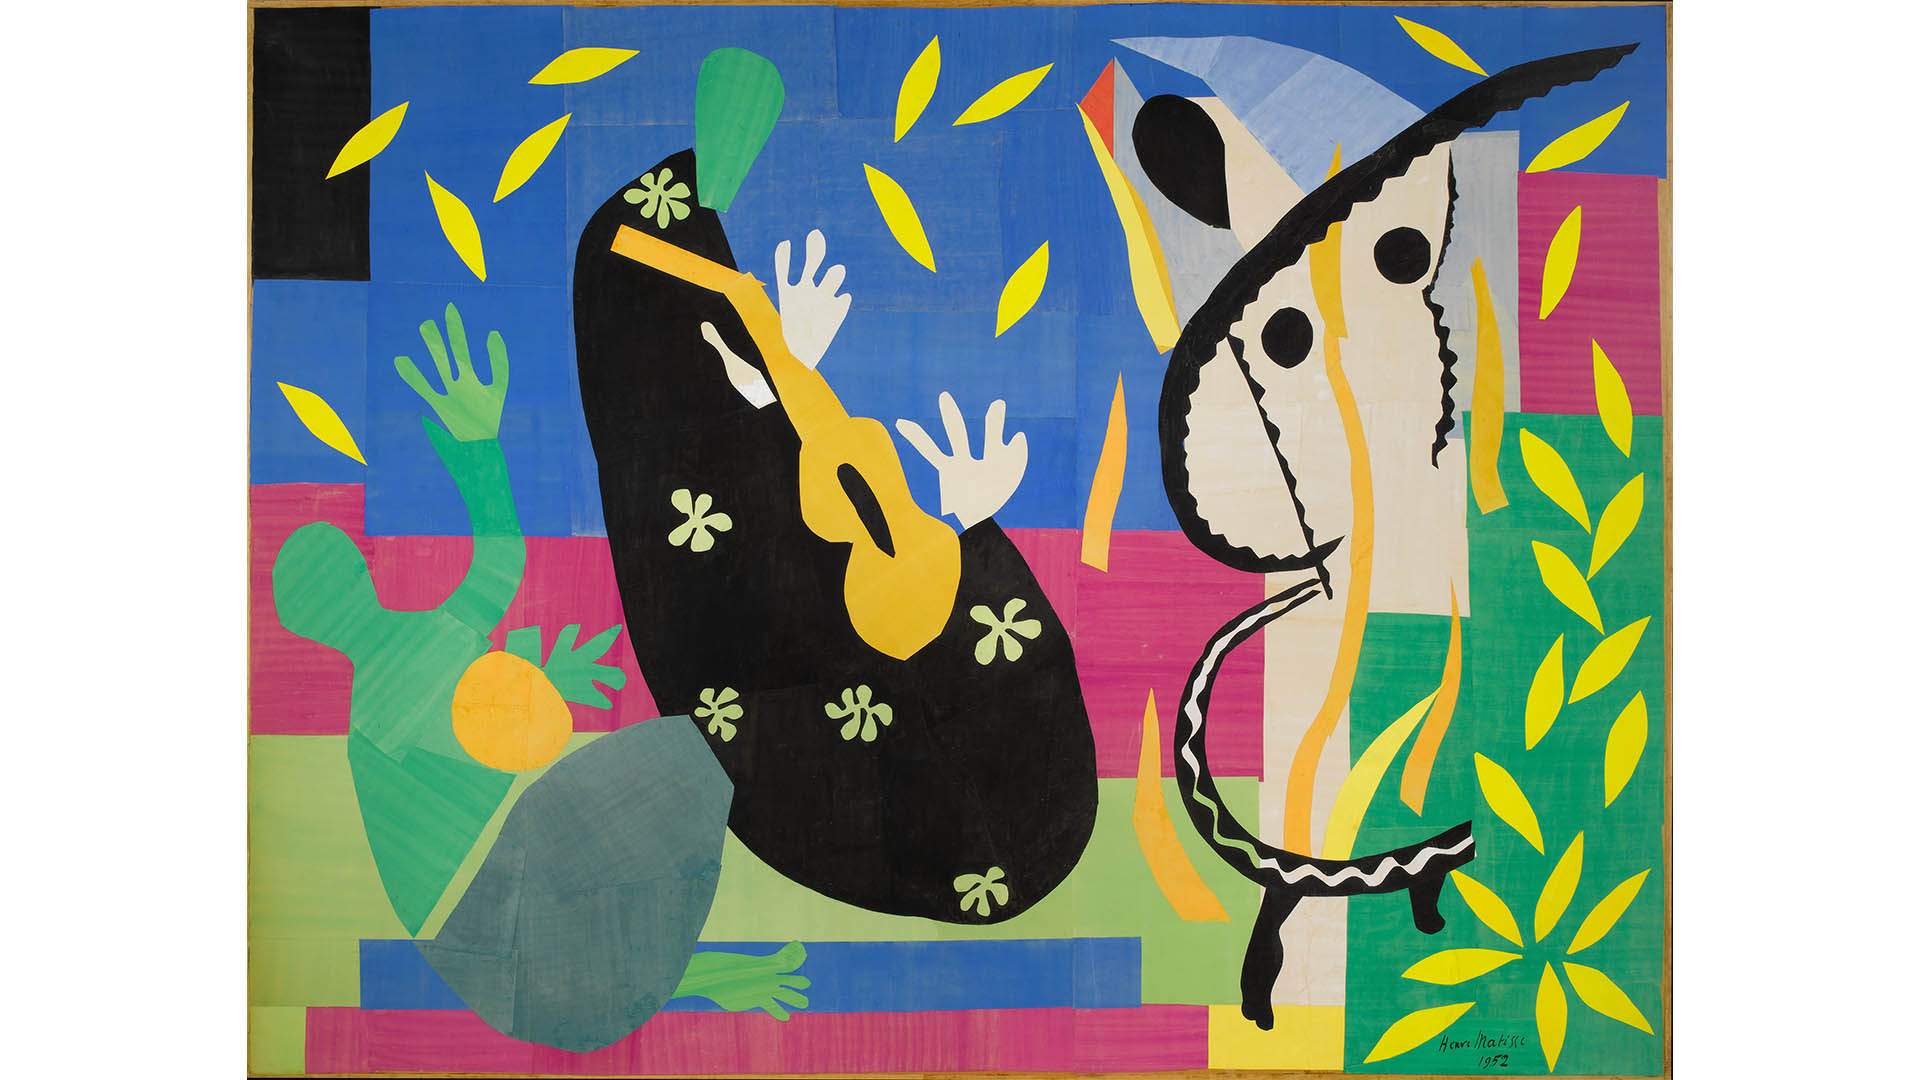 A Matisse Exhibition with Over 100 of the Artist's Works Is Coming to the Art Gallery of NSW